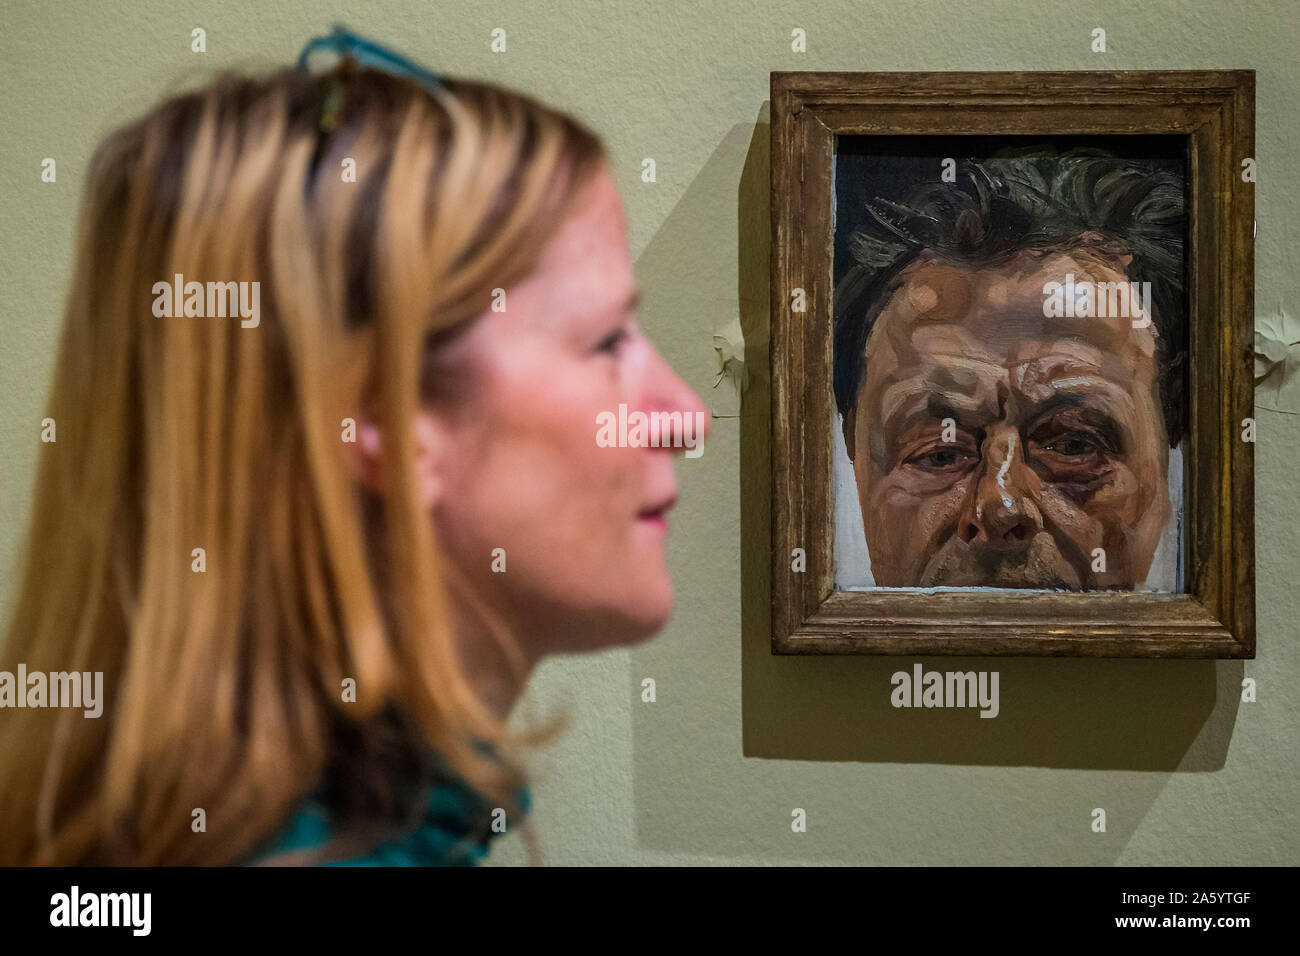 London, UK. 23rd Oct, 2019. Self portrait with a black eye, 1978 - Lucian Freud self-portraits at the Royal Academy of Arts. Executed over almost seven decades on canvas and paper, the exhibition brings together 56 works that chart Freud’s artistic development. Credit: Guy Bell/Alamy Live News Stock Photo